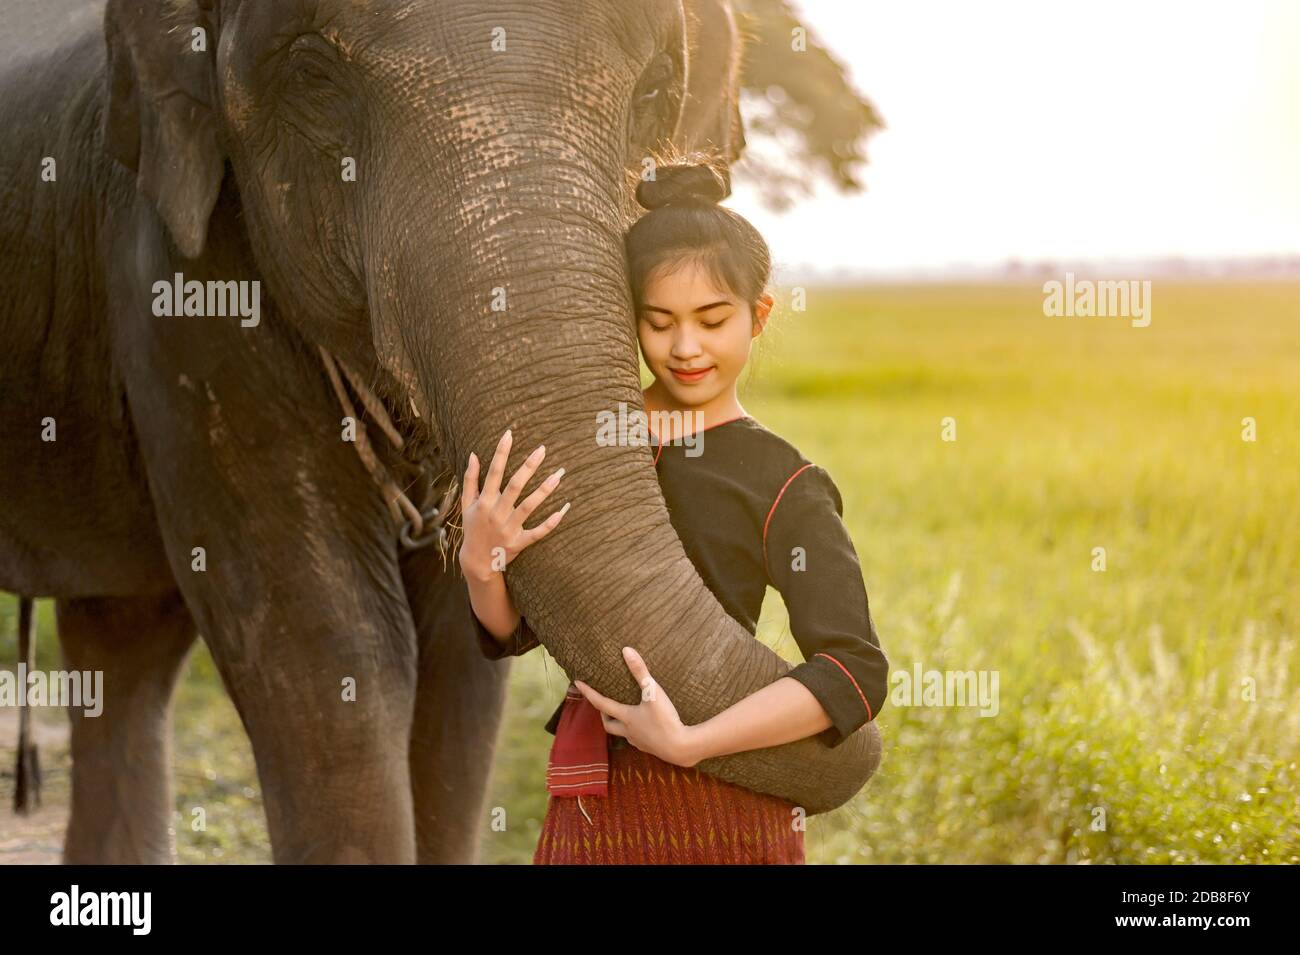 Portrait of a woman standing in a paddy field with an elephant, Thailand Stock Photo